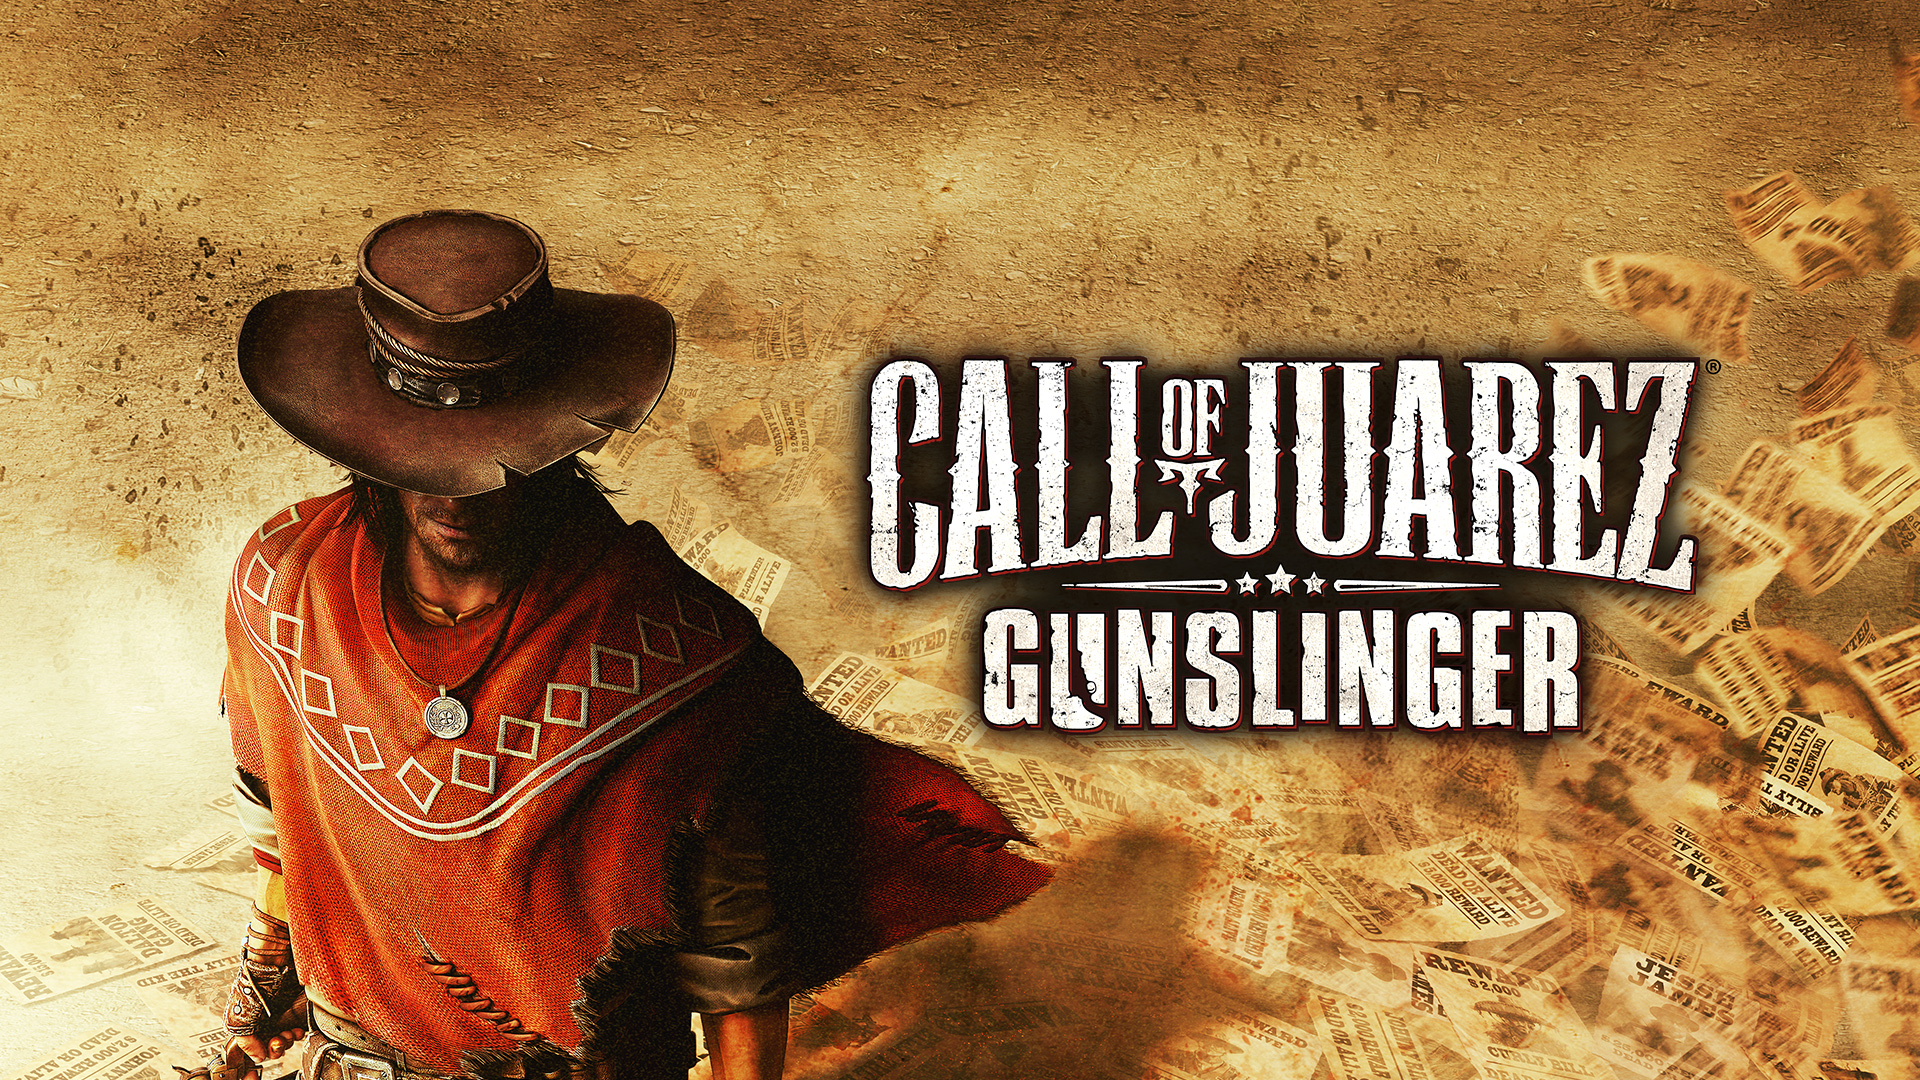 Call of juarez gunslinger steam is required фото 10